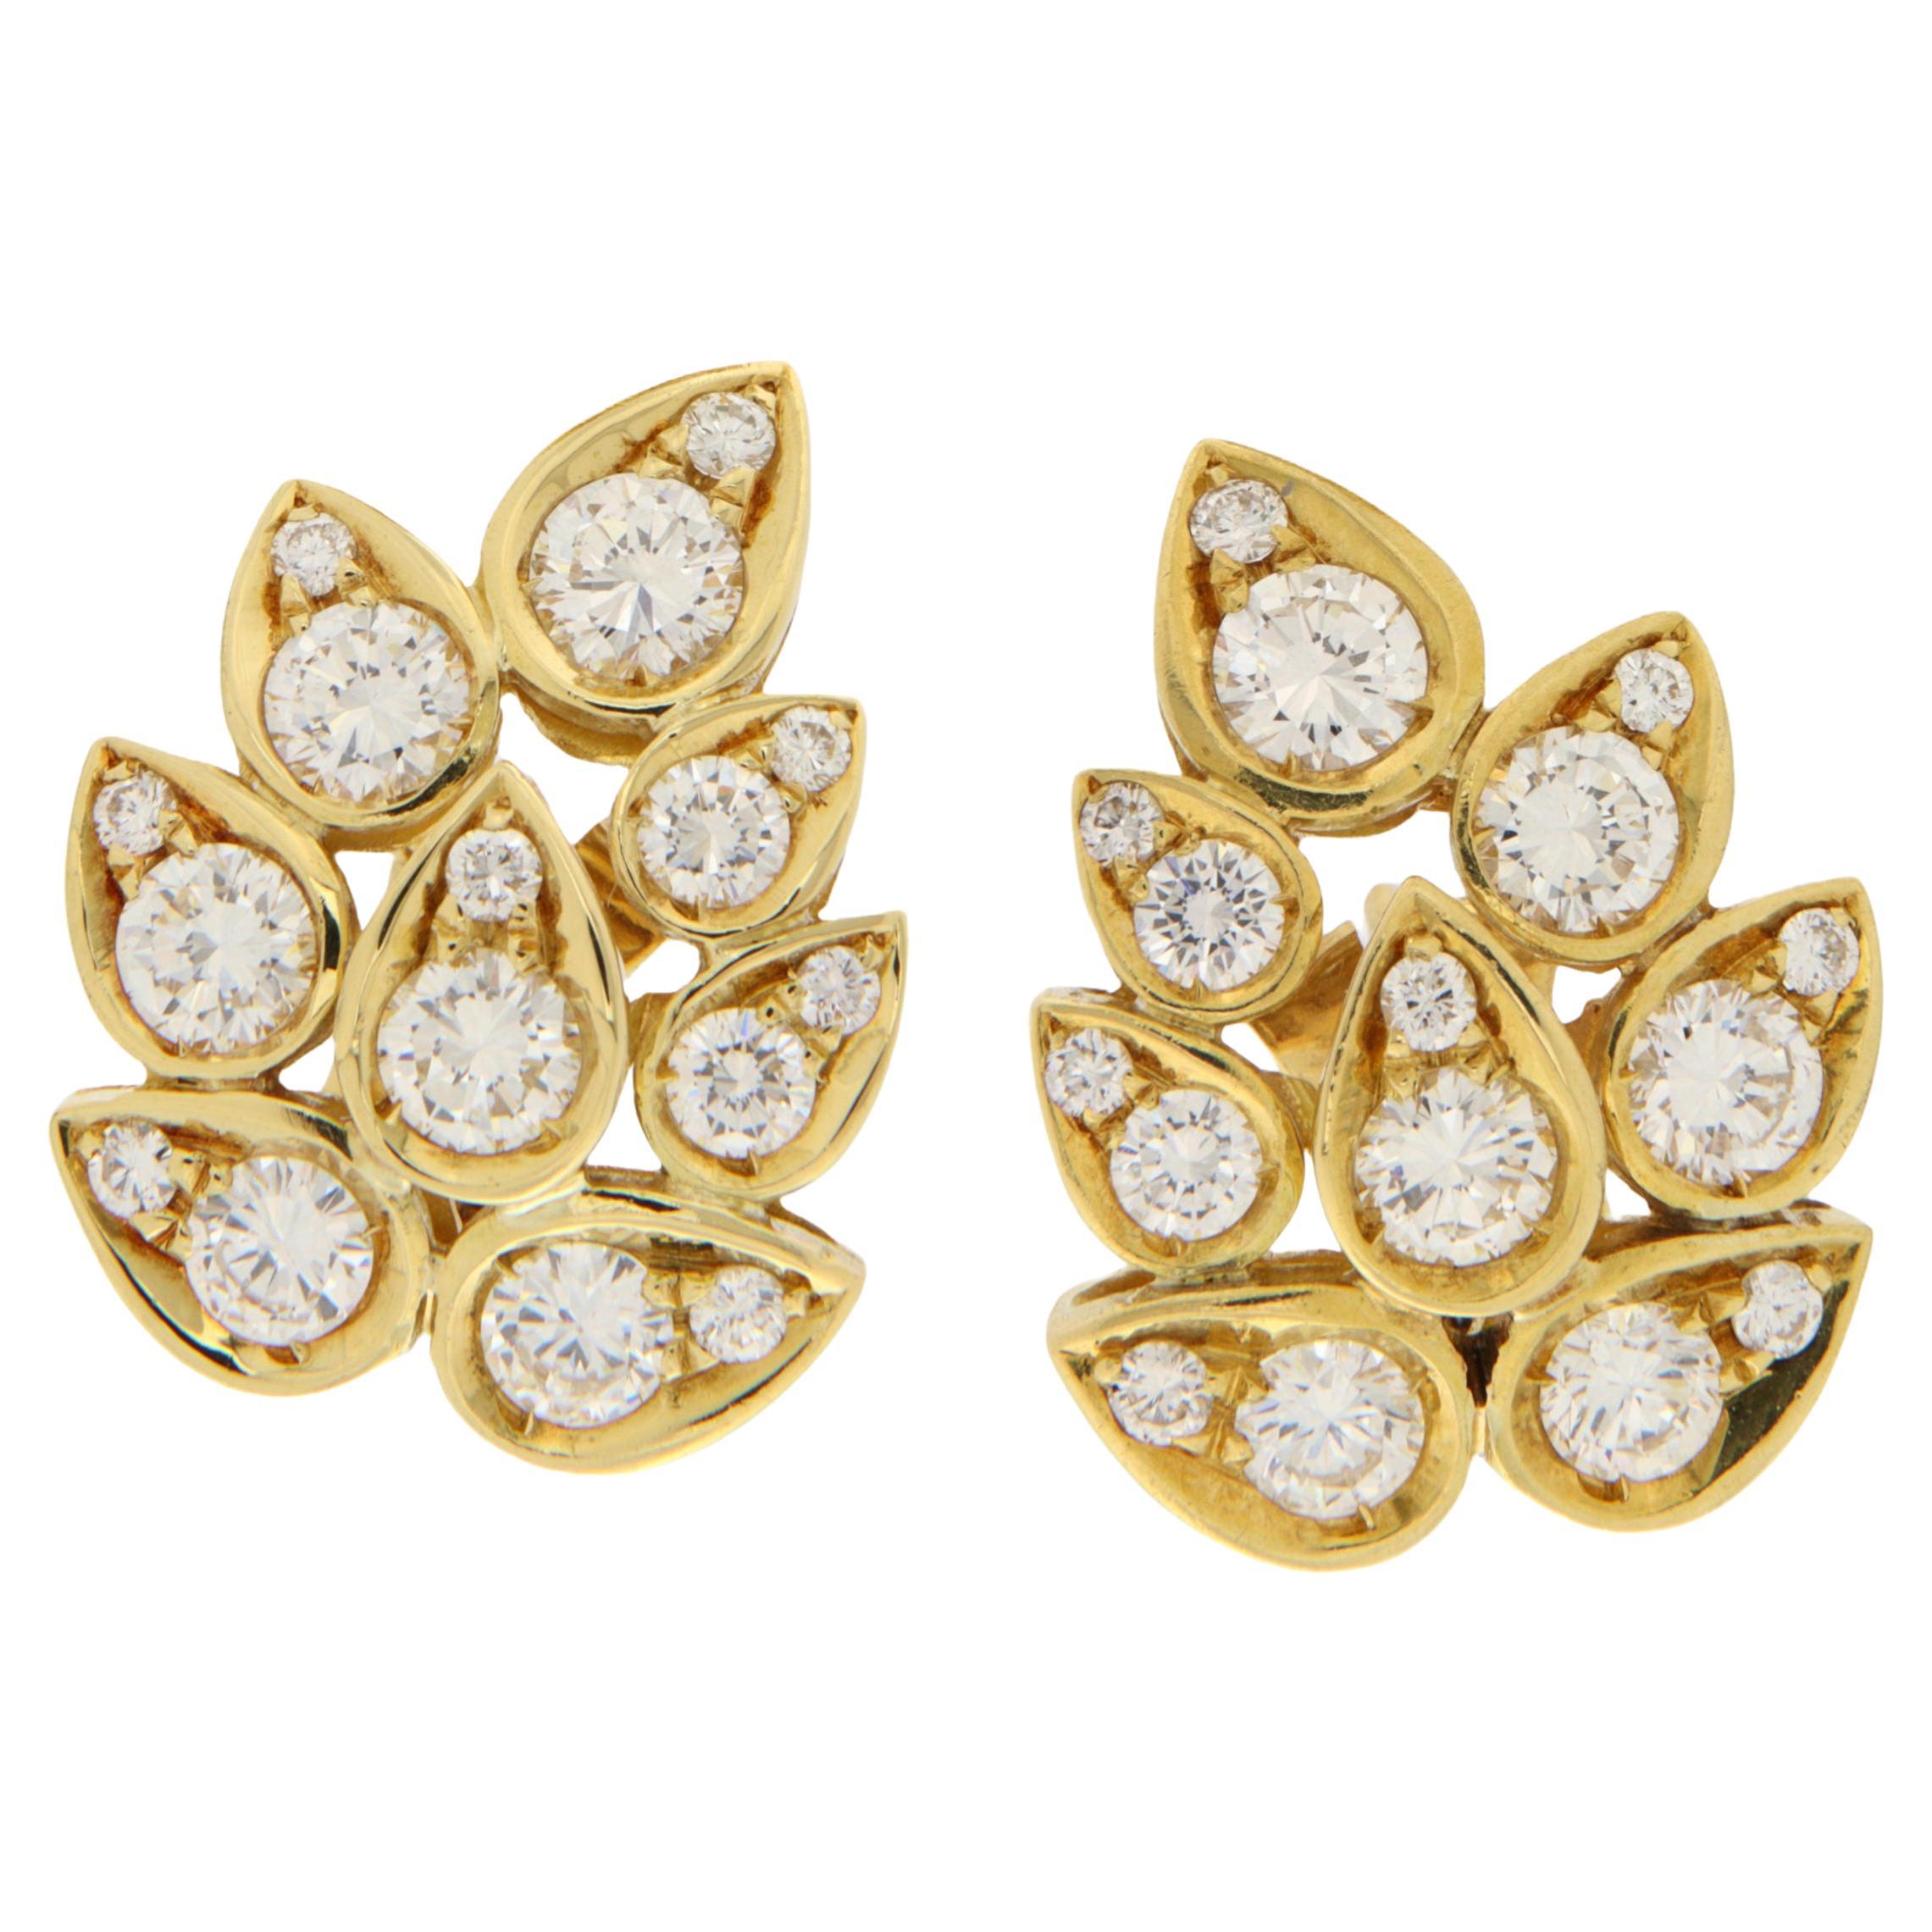 Yellow gold earrings with 2.64 ct brilliant cut diamonds